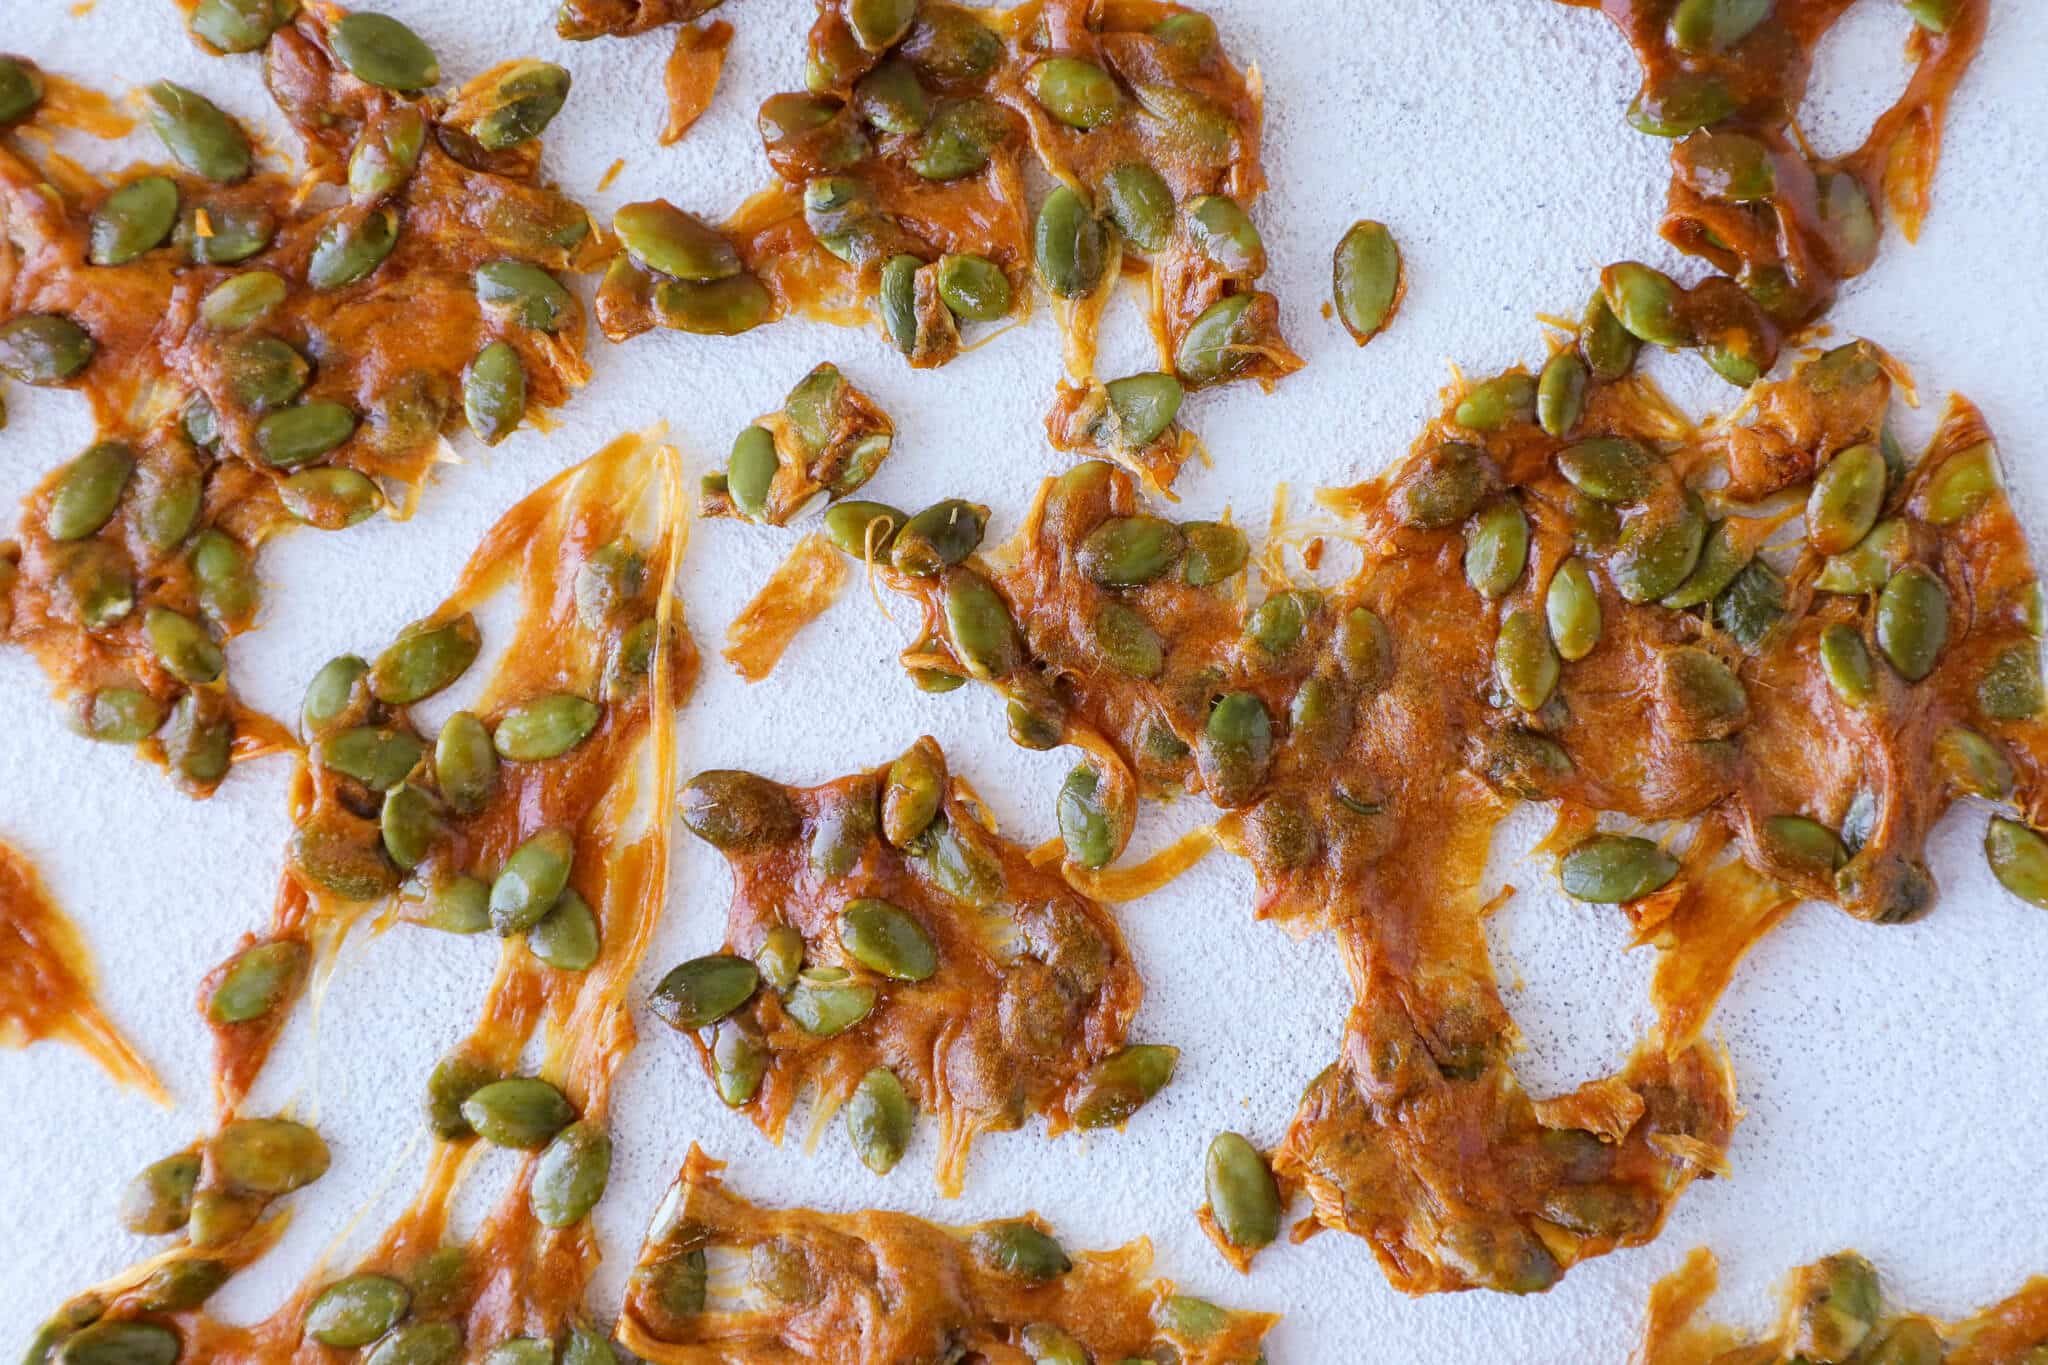 Pumpkin Seed Brittle Spread Out